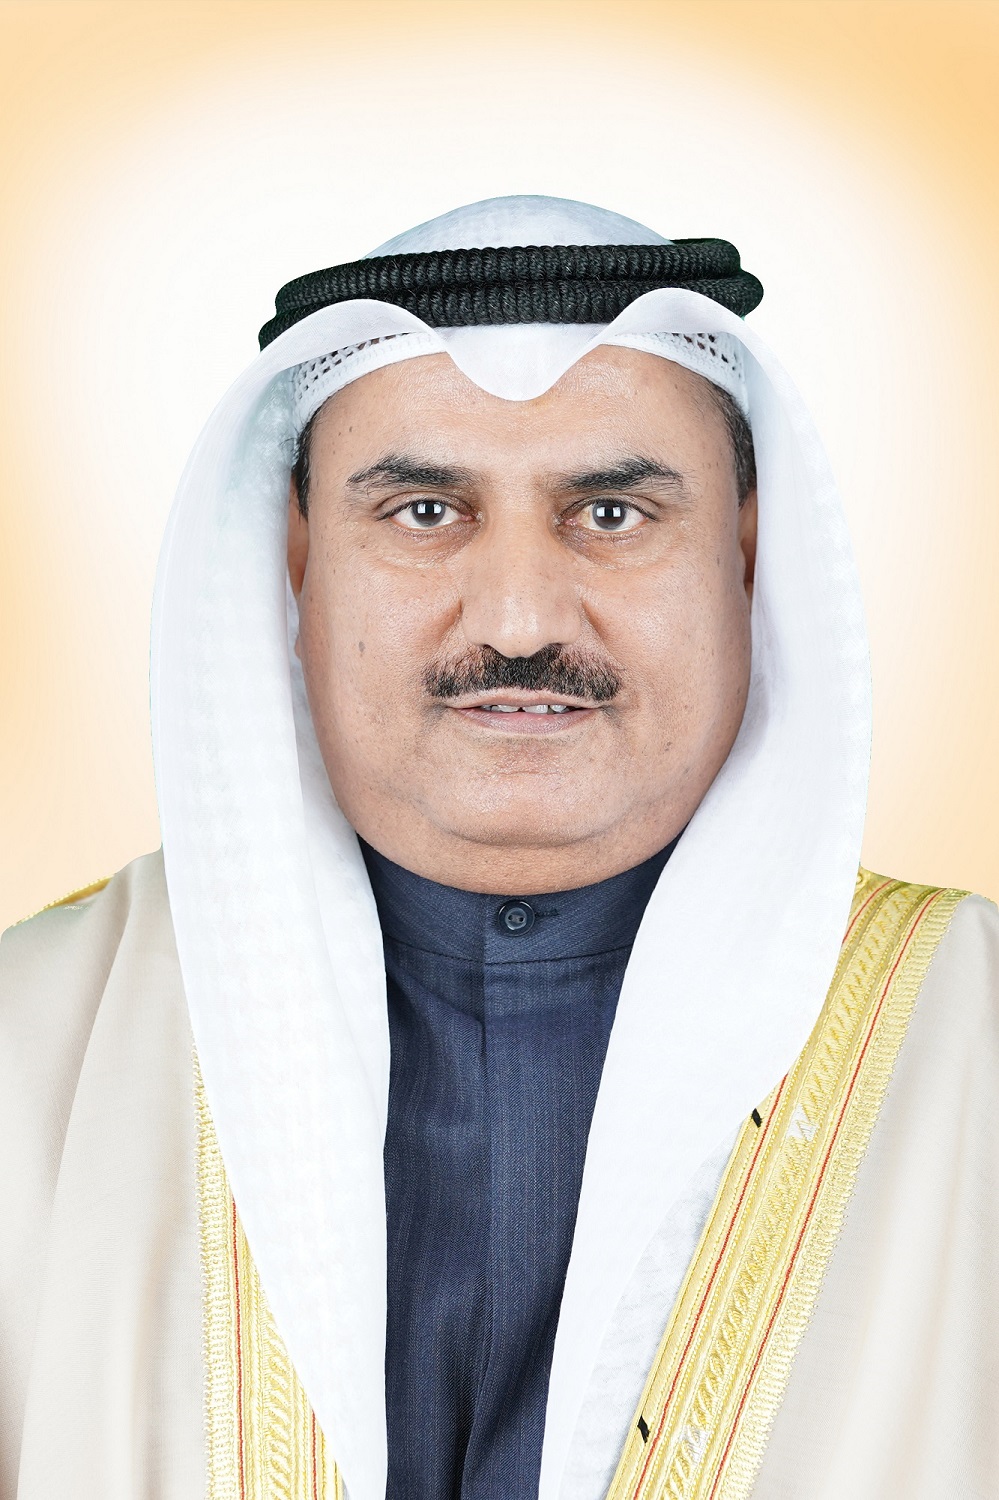 Minister of Education and Higher Education Dr. Saud Al-Harbi